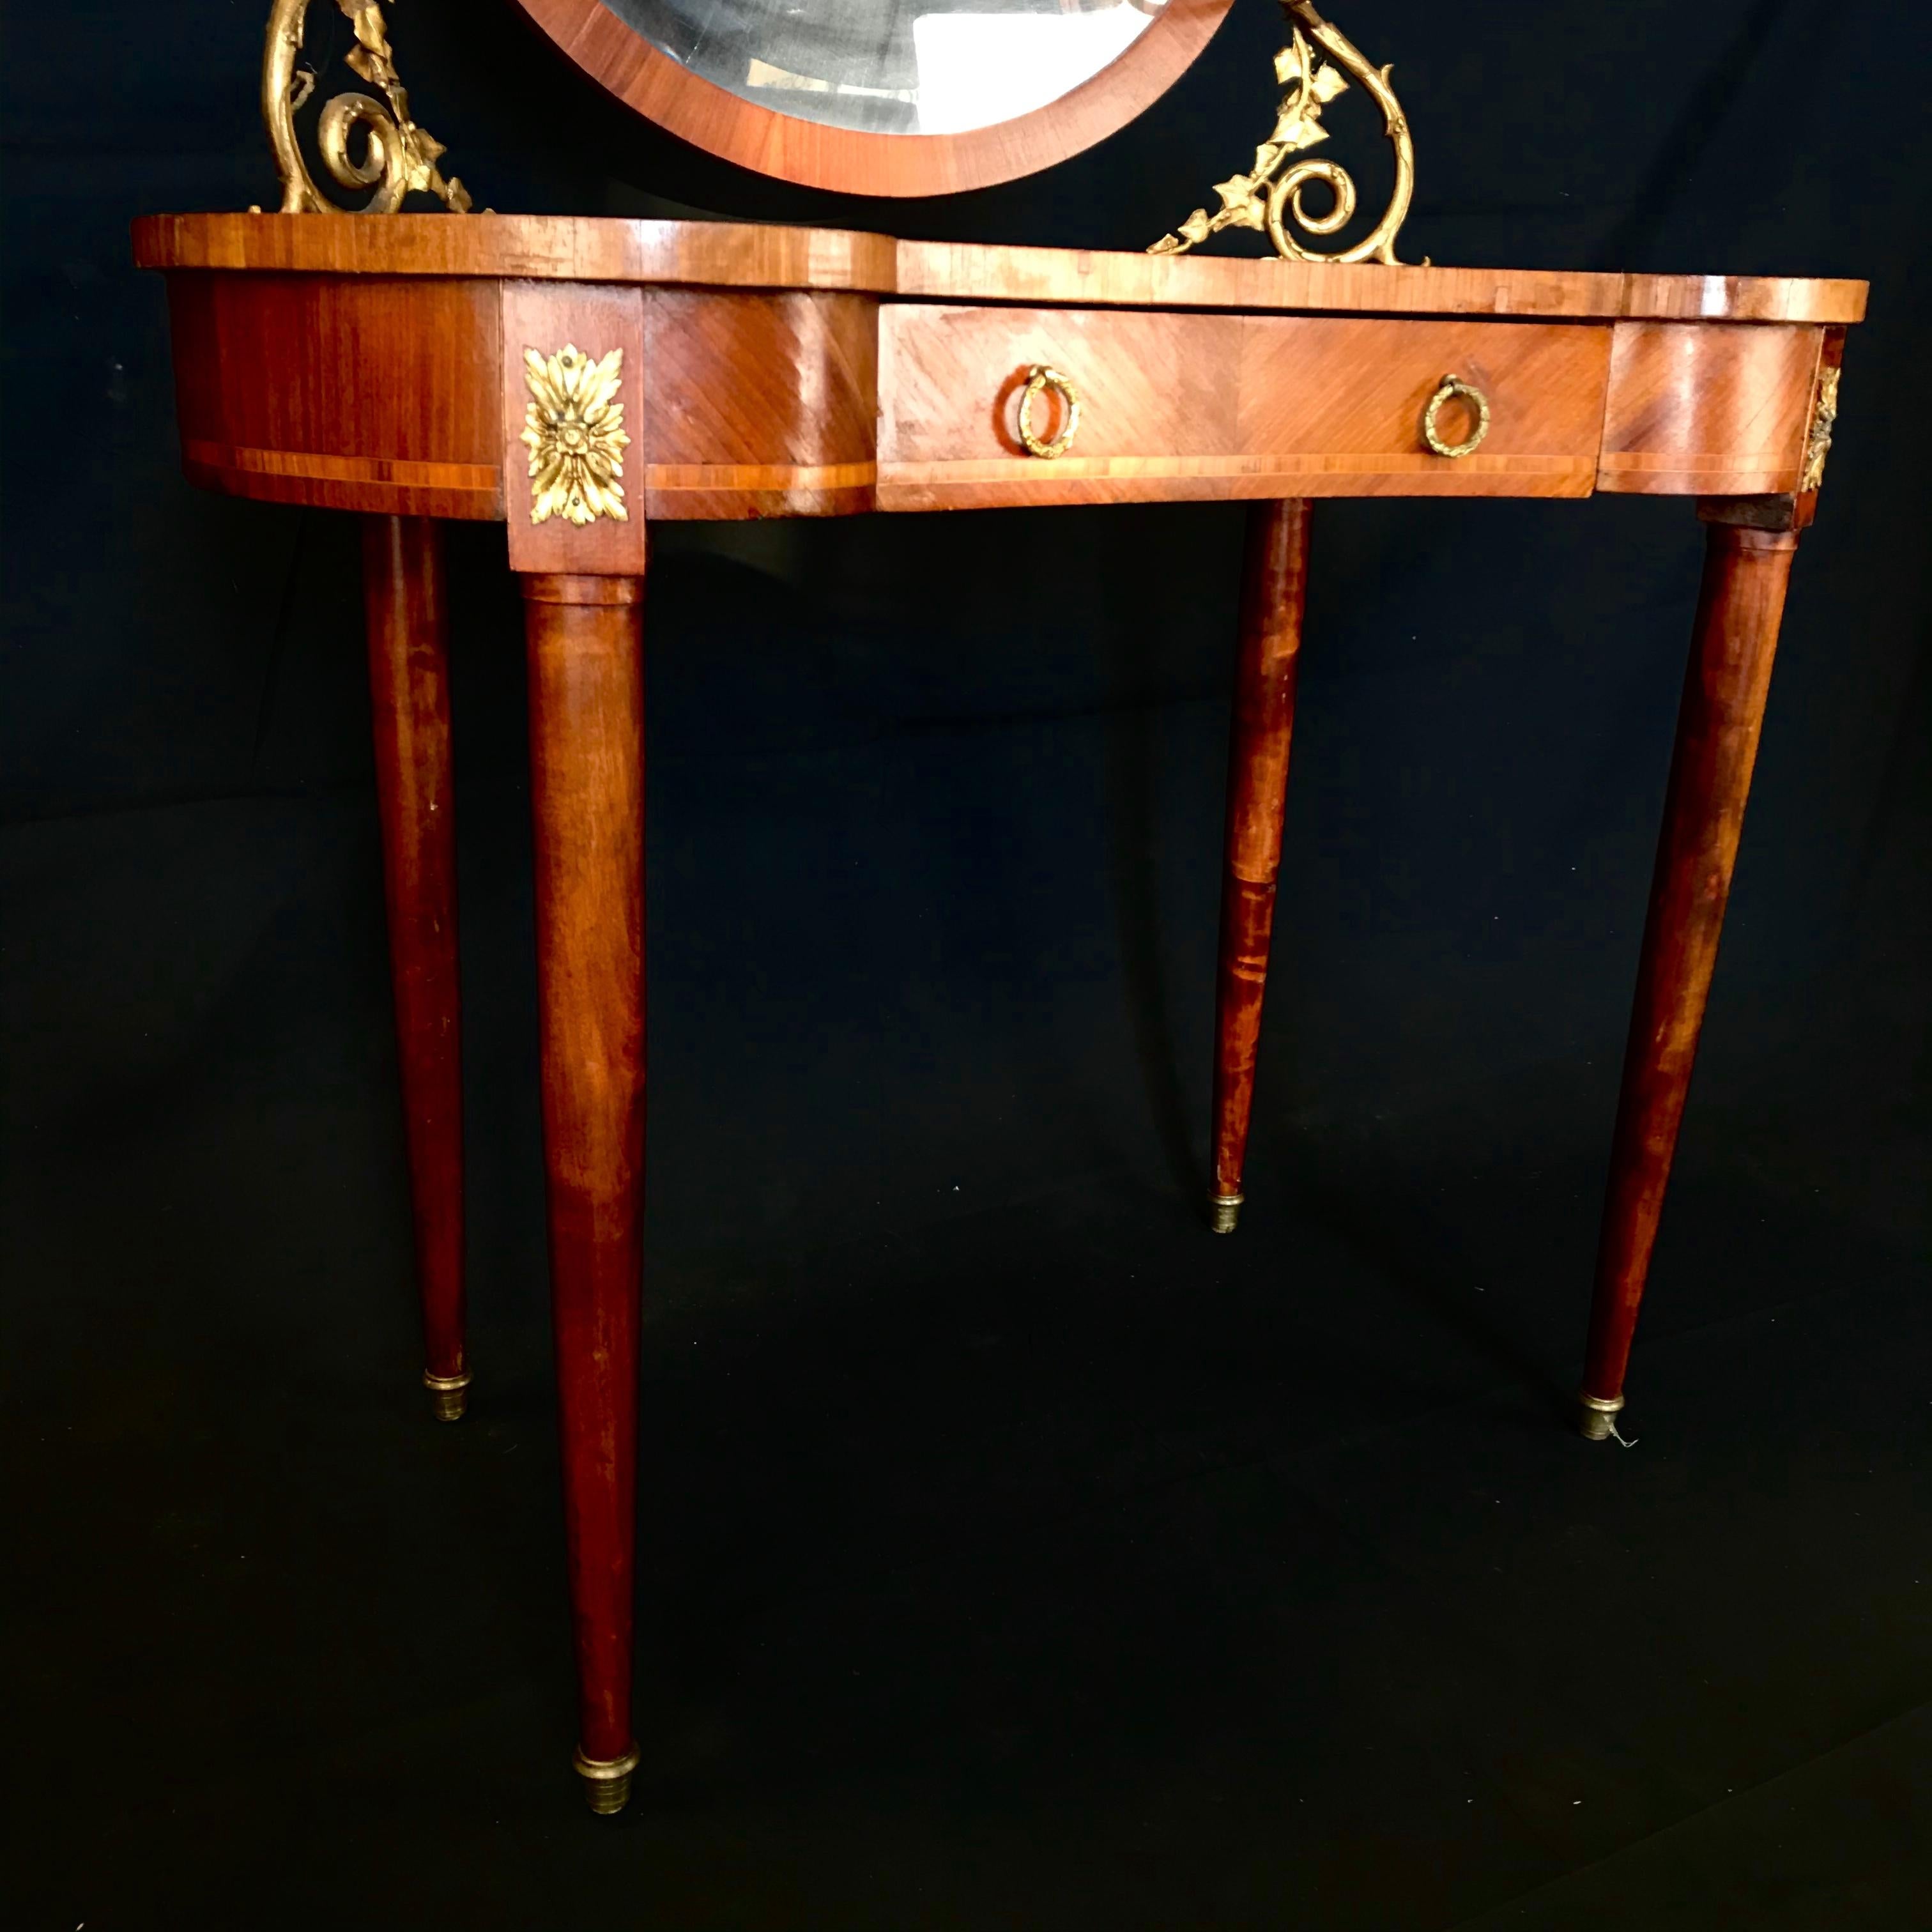 Romantic French Inlaid Walnut and Bronze Dressing Table with Candelabra Arms 1